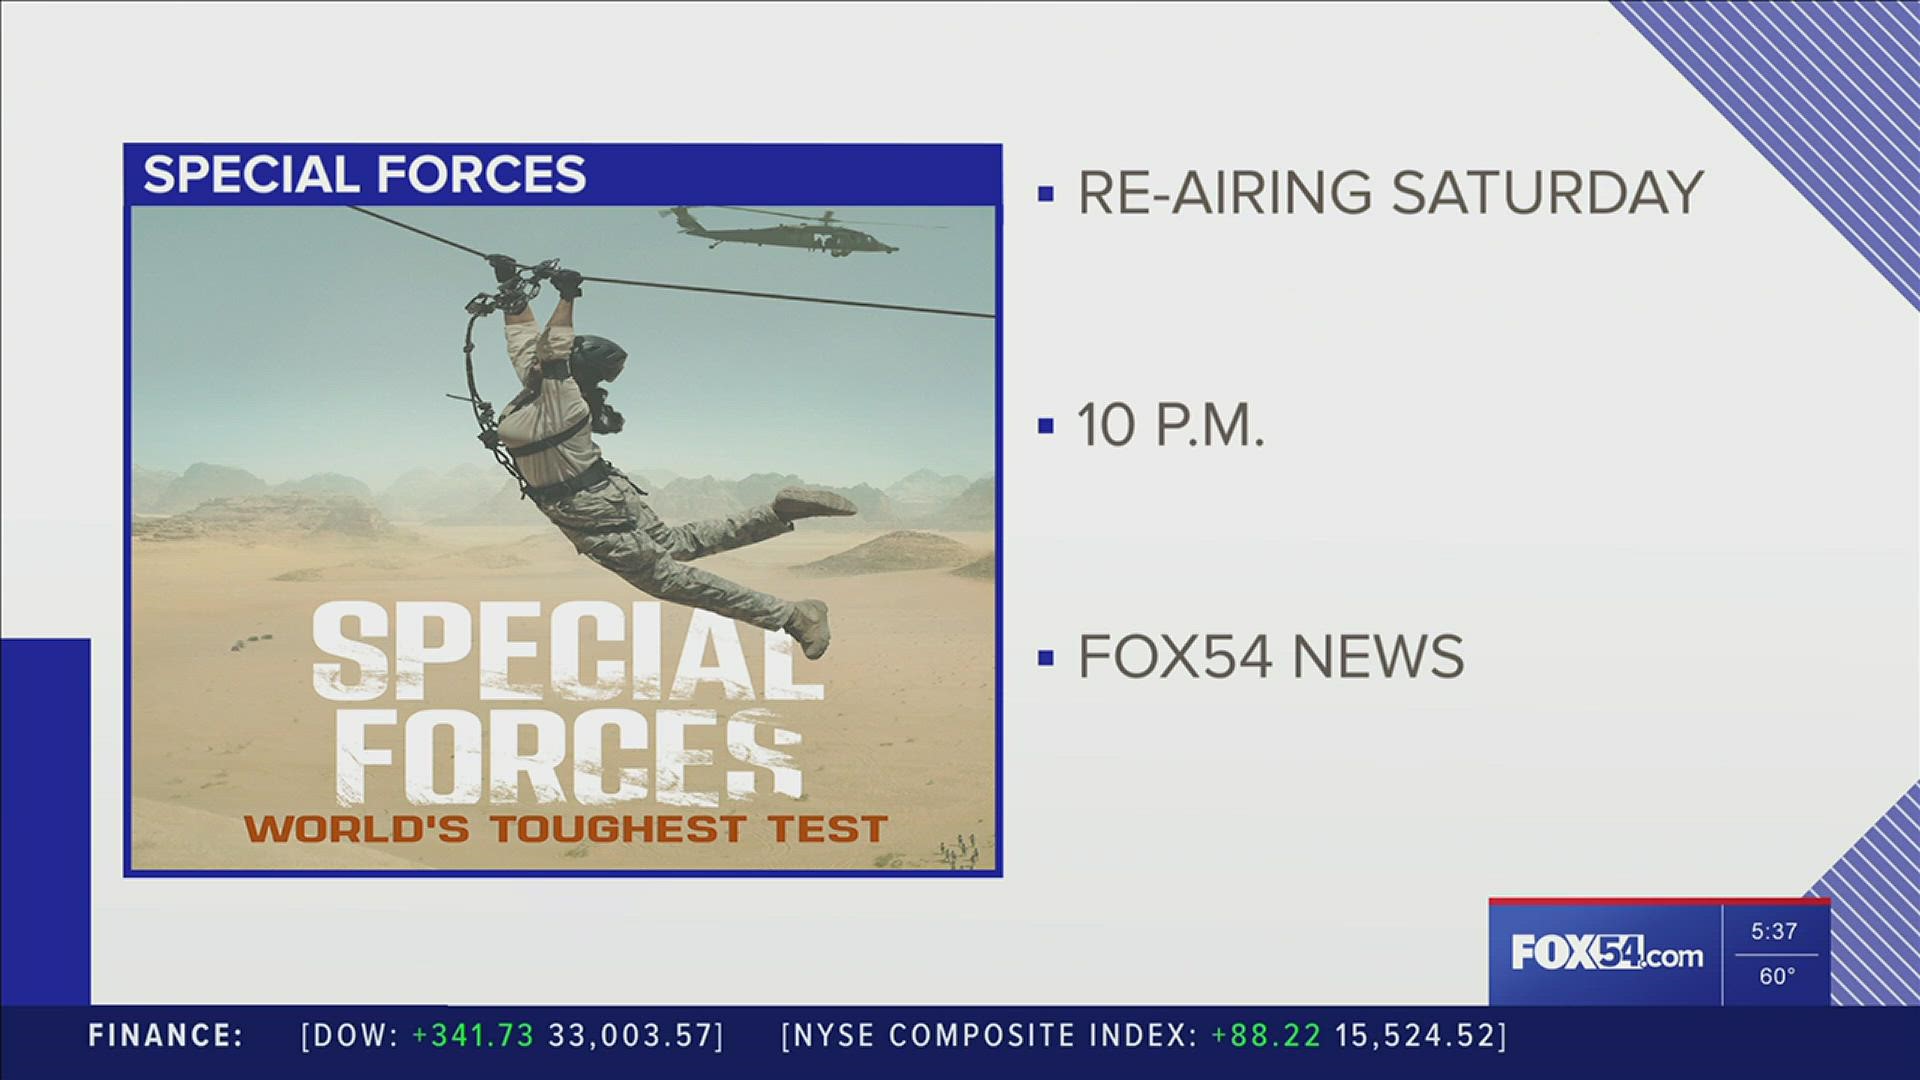 March 1 Special Forces preempted by severe weather coverage reairs March 4 at 10:00 p.m.